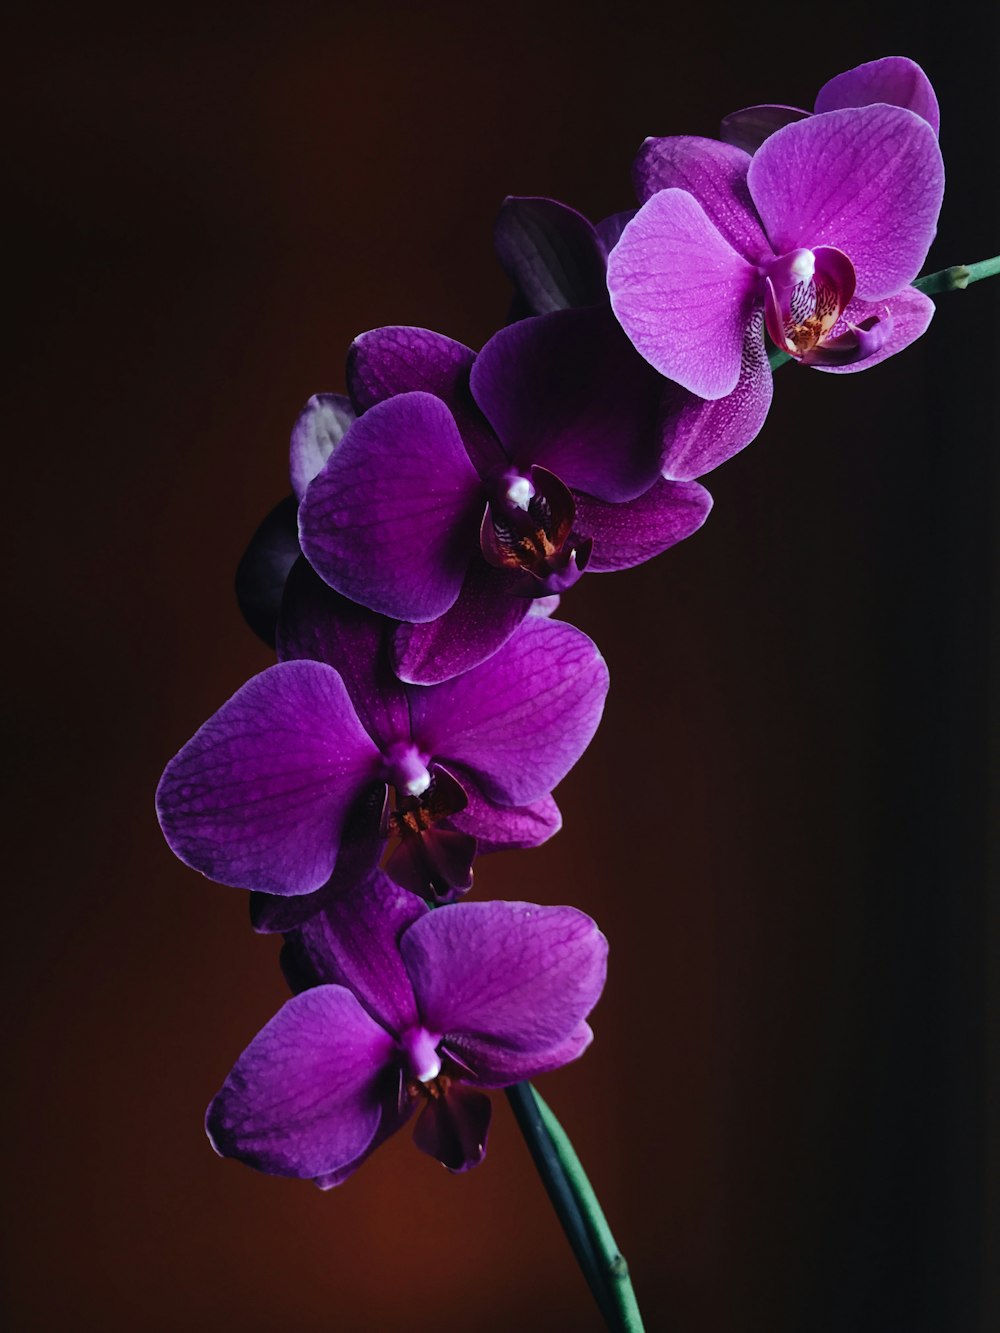 500+ Orchid Pictures | Download Free Images & Stock Photos on Unsplash